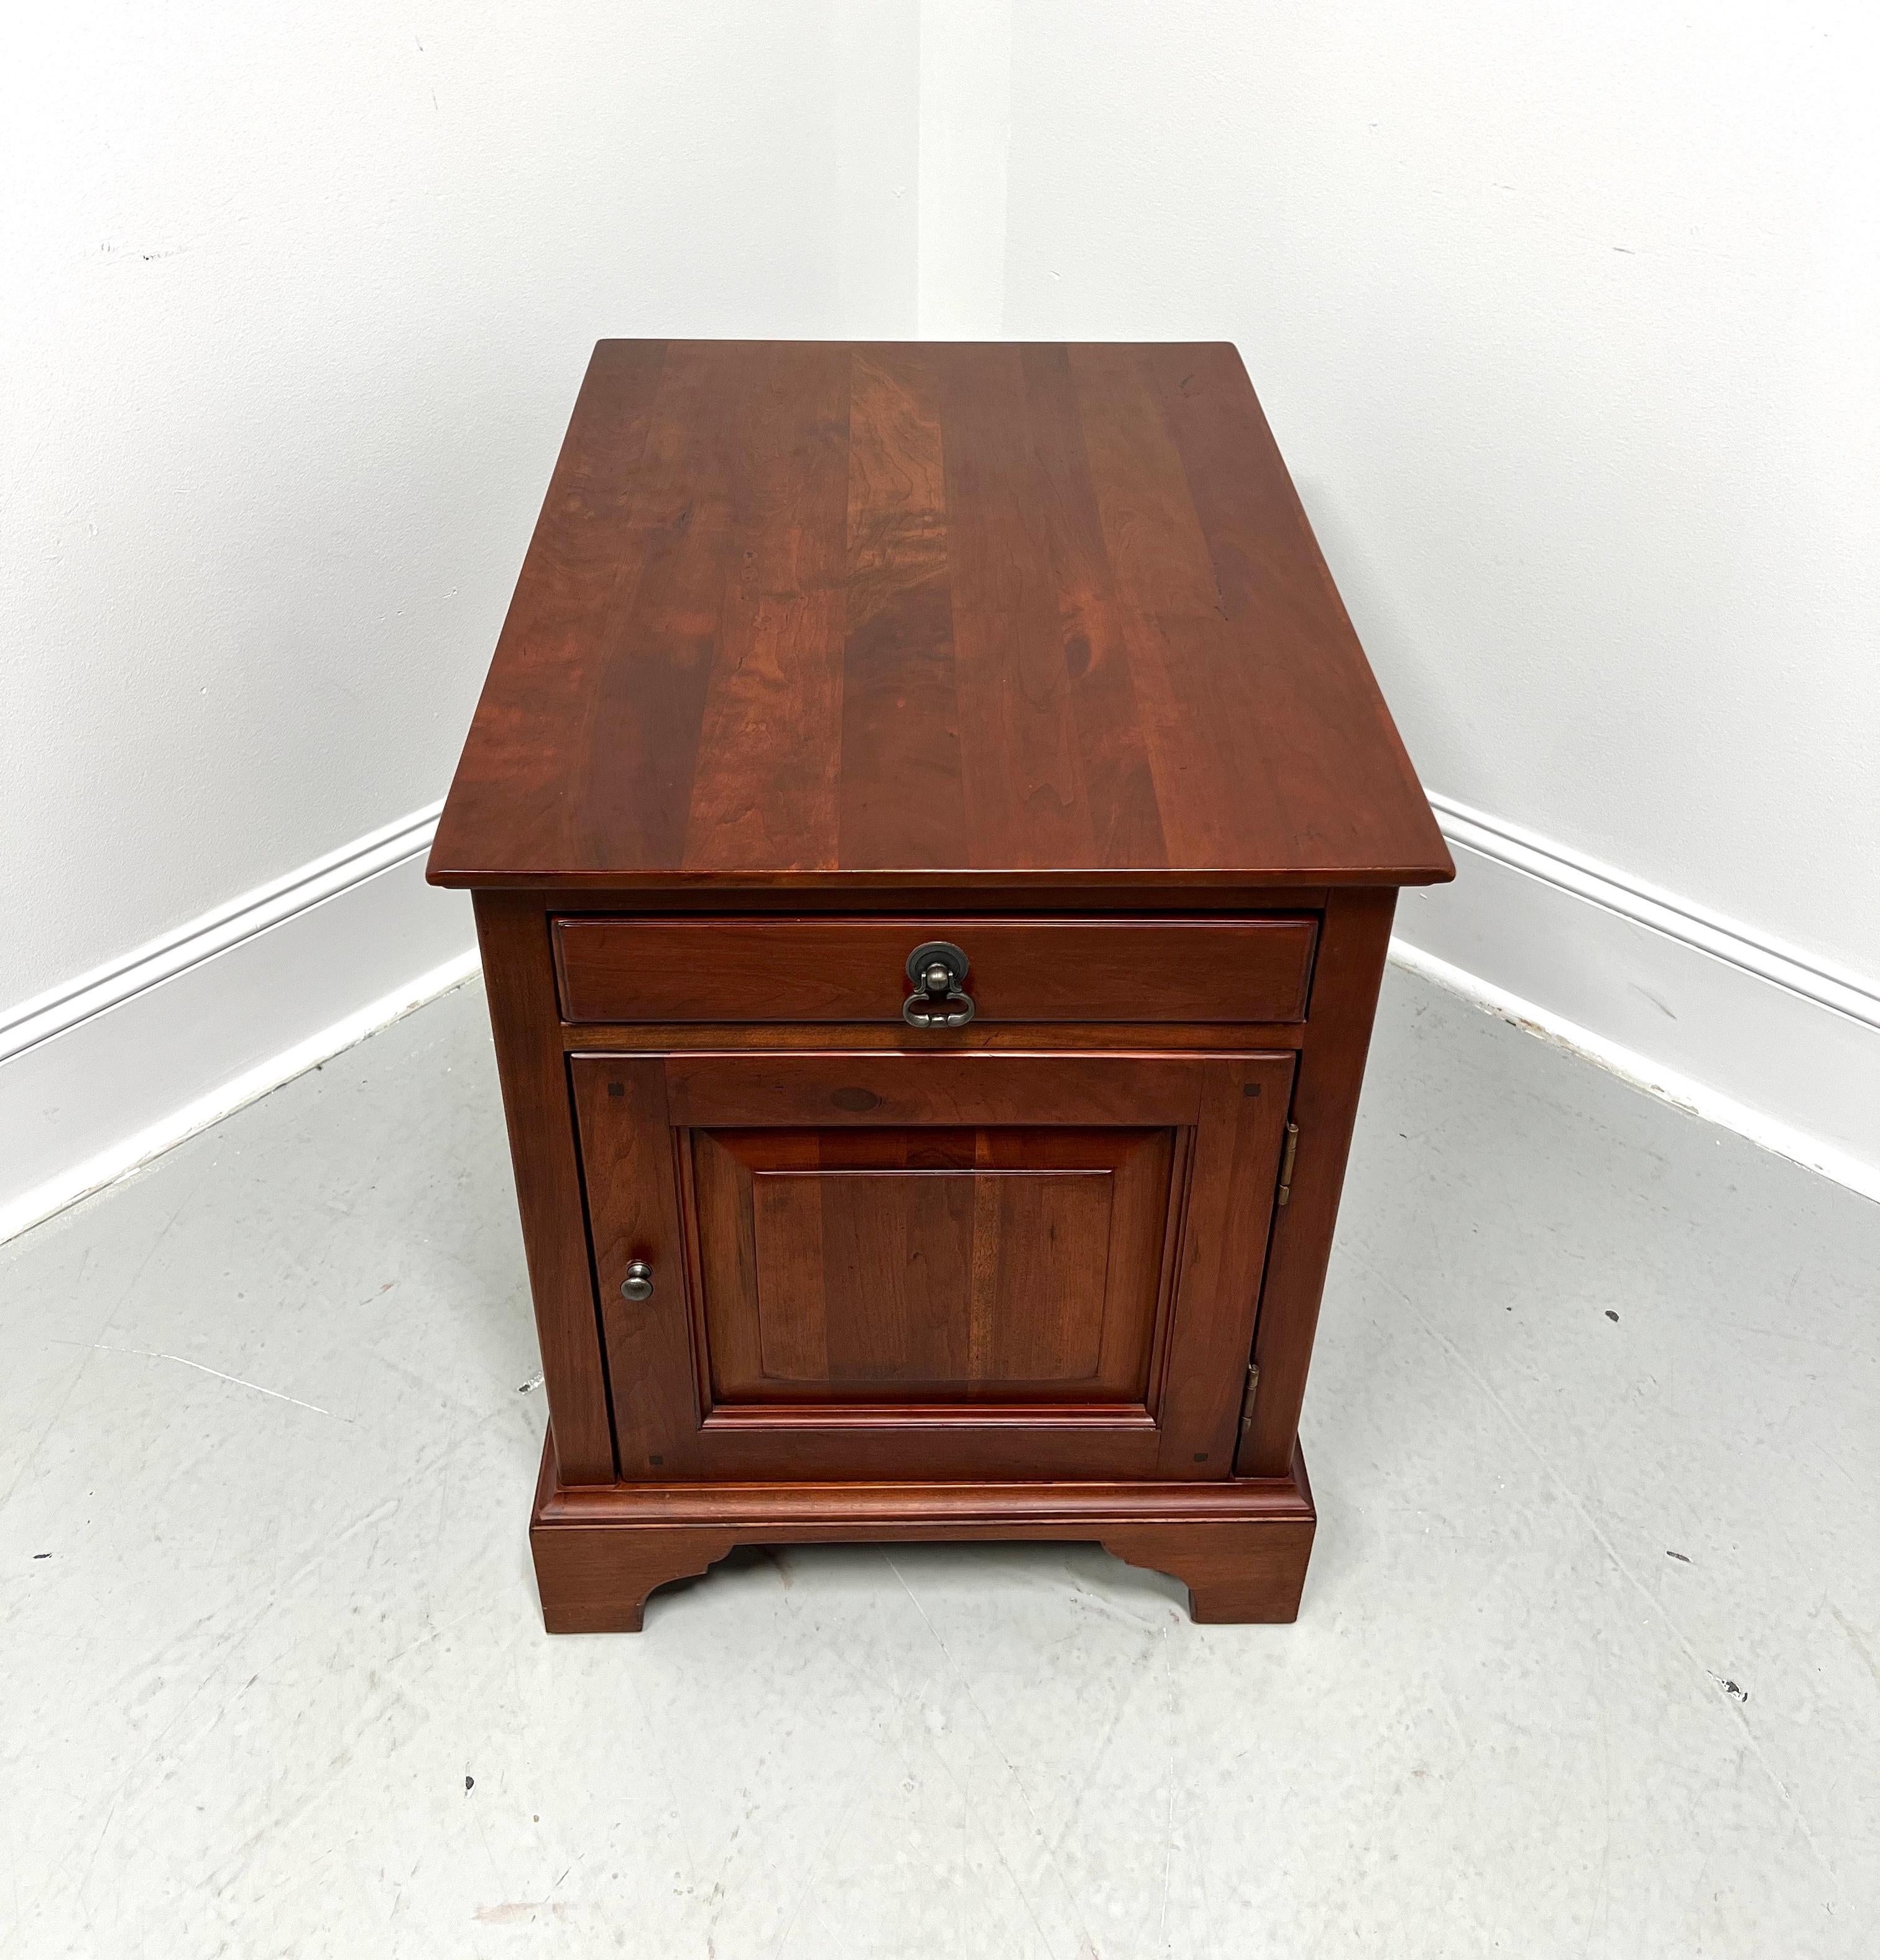 An Arts & Crafts style cabinet accent table by Lexington Furniture, from their Bob Timberlake Collection. Solid cherry wood with brass hardware, miter edge to the top, finished on all sides, bevel edge to the base, and bracket feet. Features one